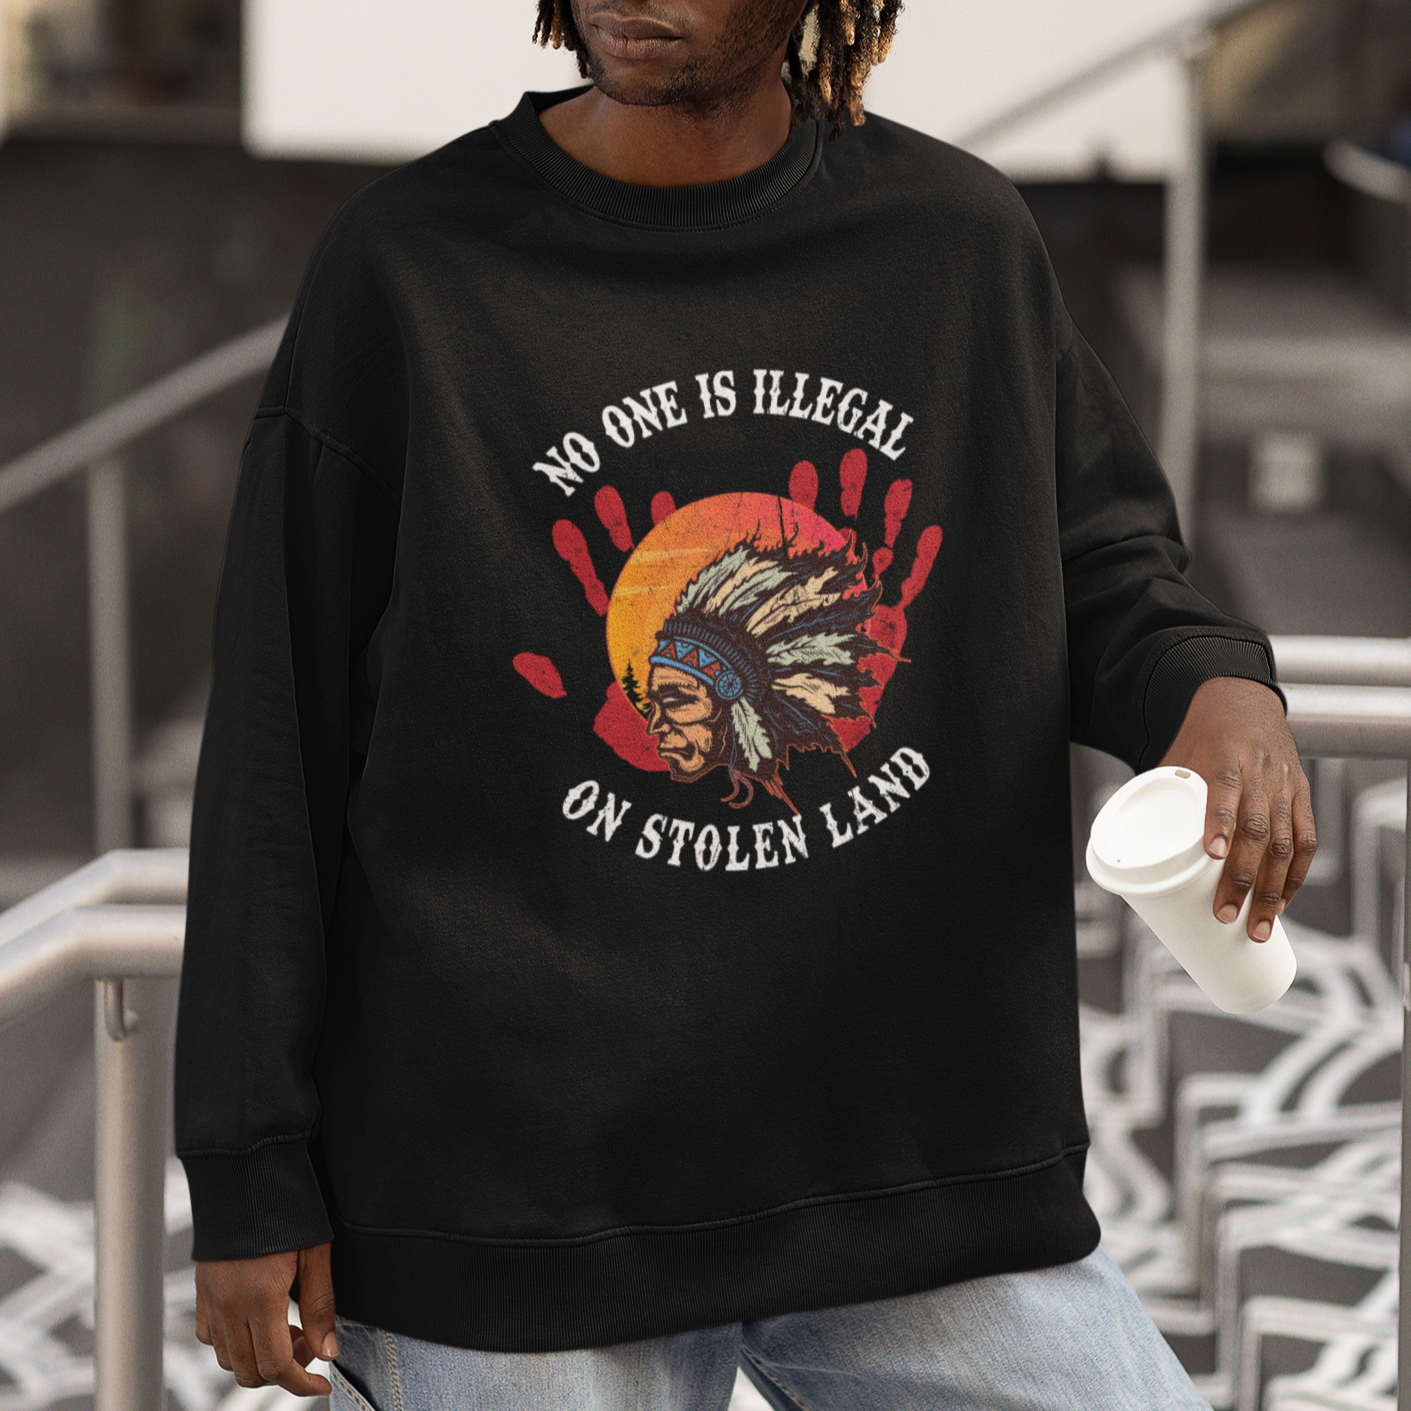 Native American Sweatshirt No One Is Illegal On Stolen Land Indigenous American Indian TS02